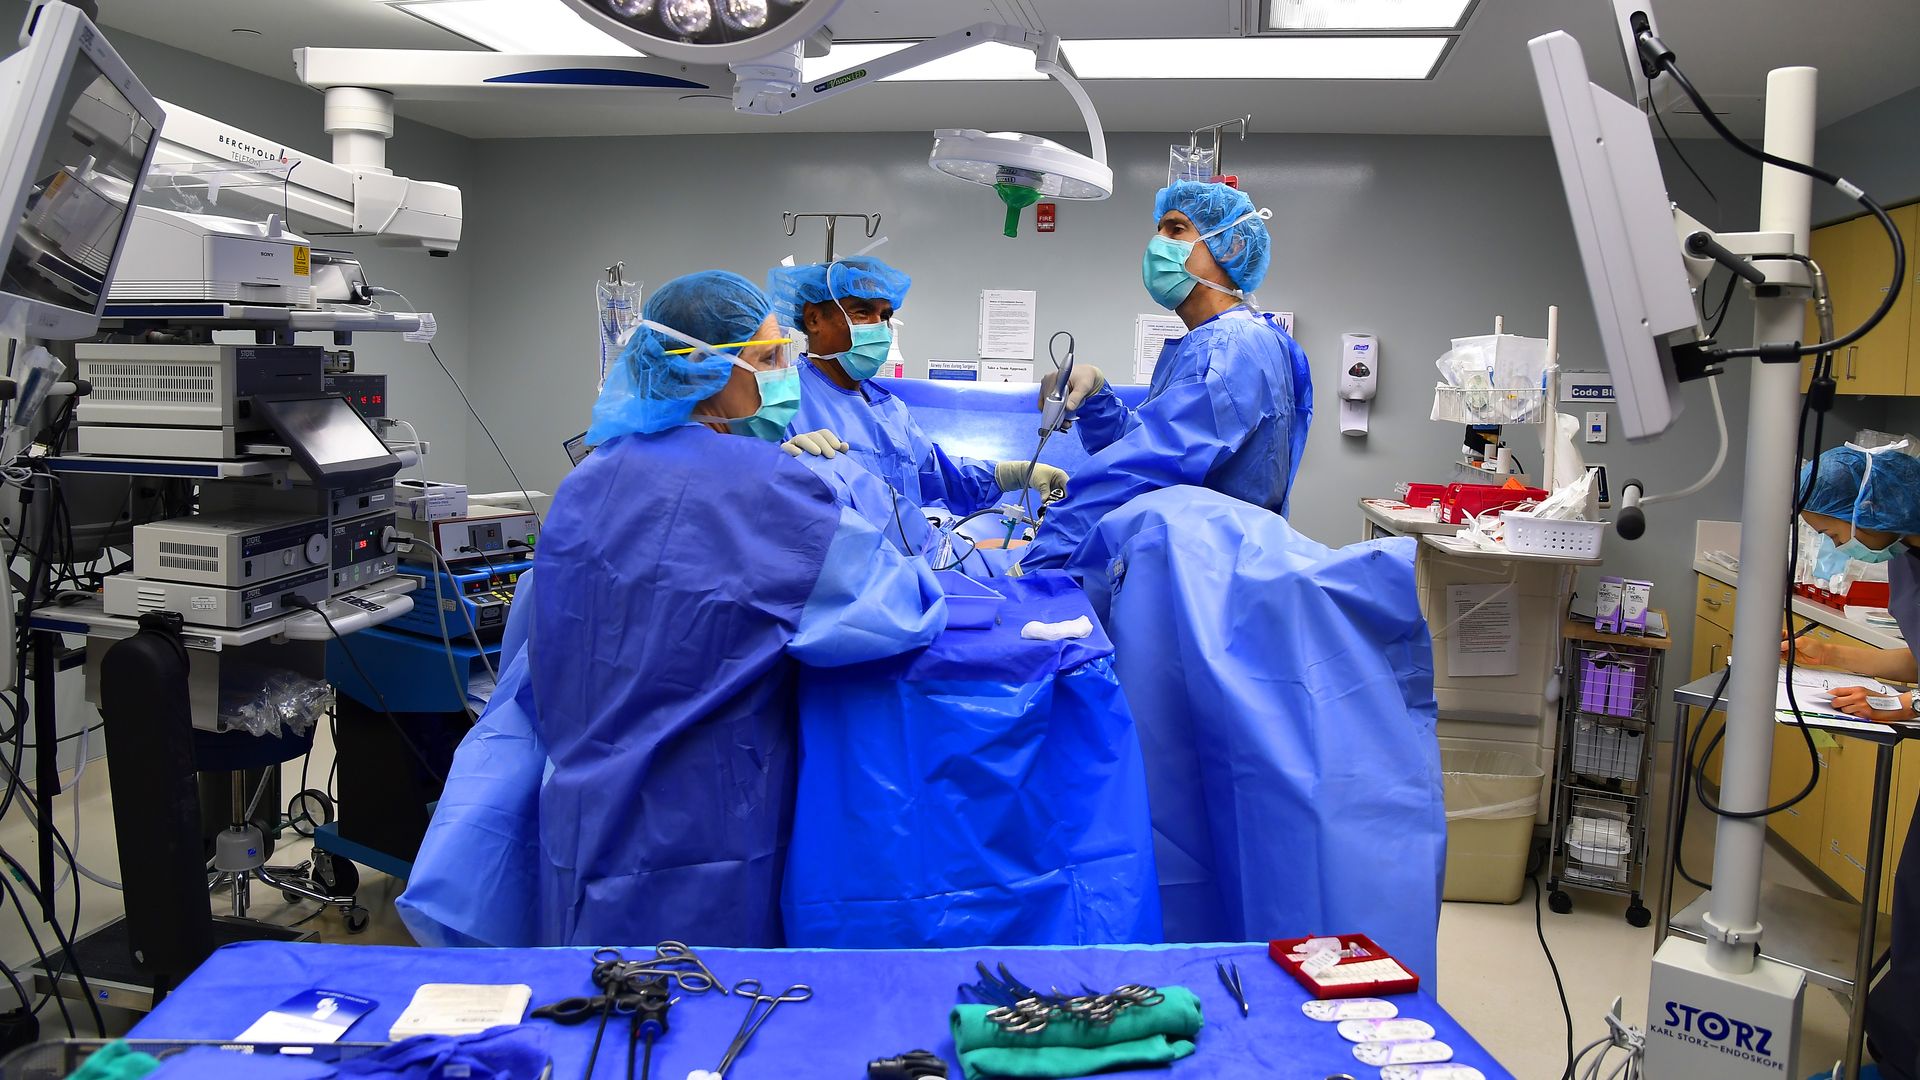 Doctors dressed in blue operate on a patient in a surgical suite.